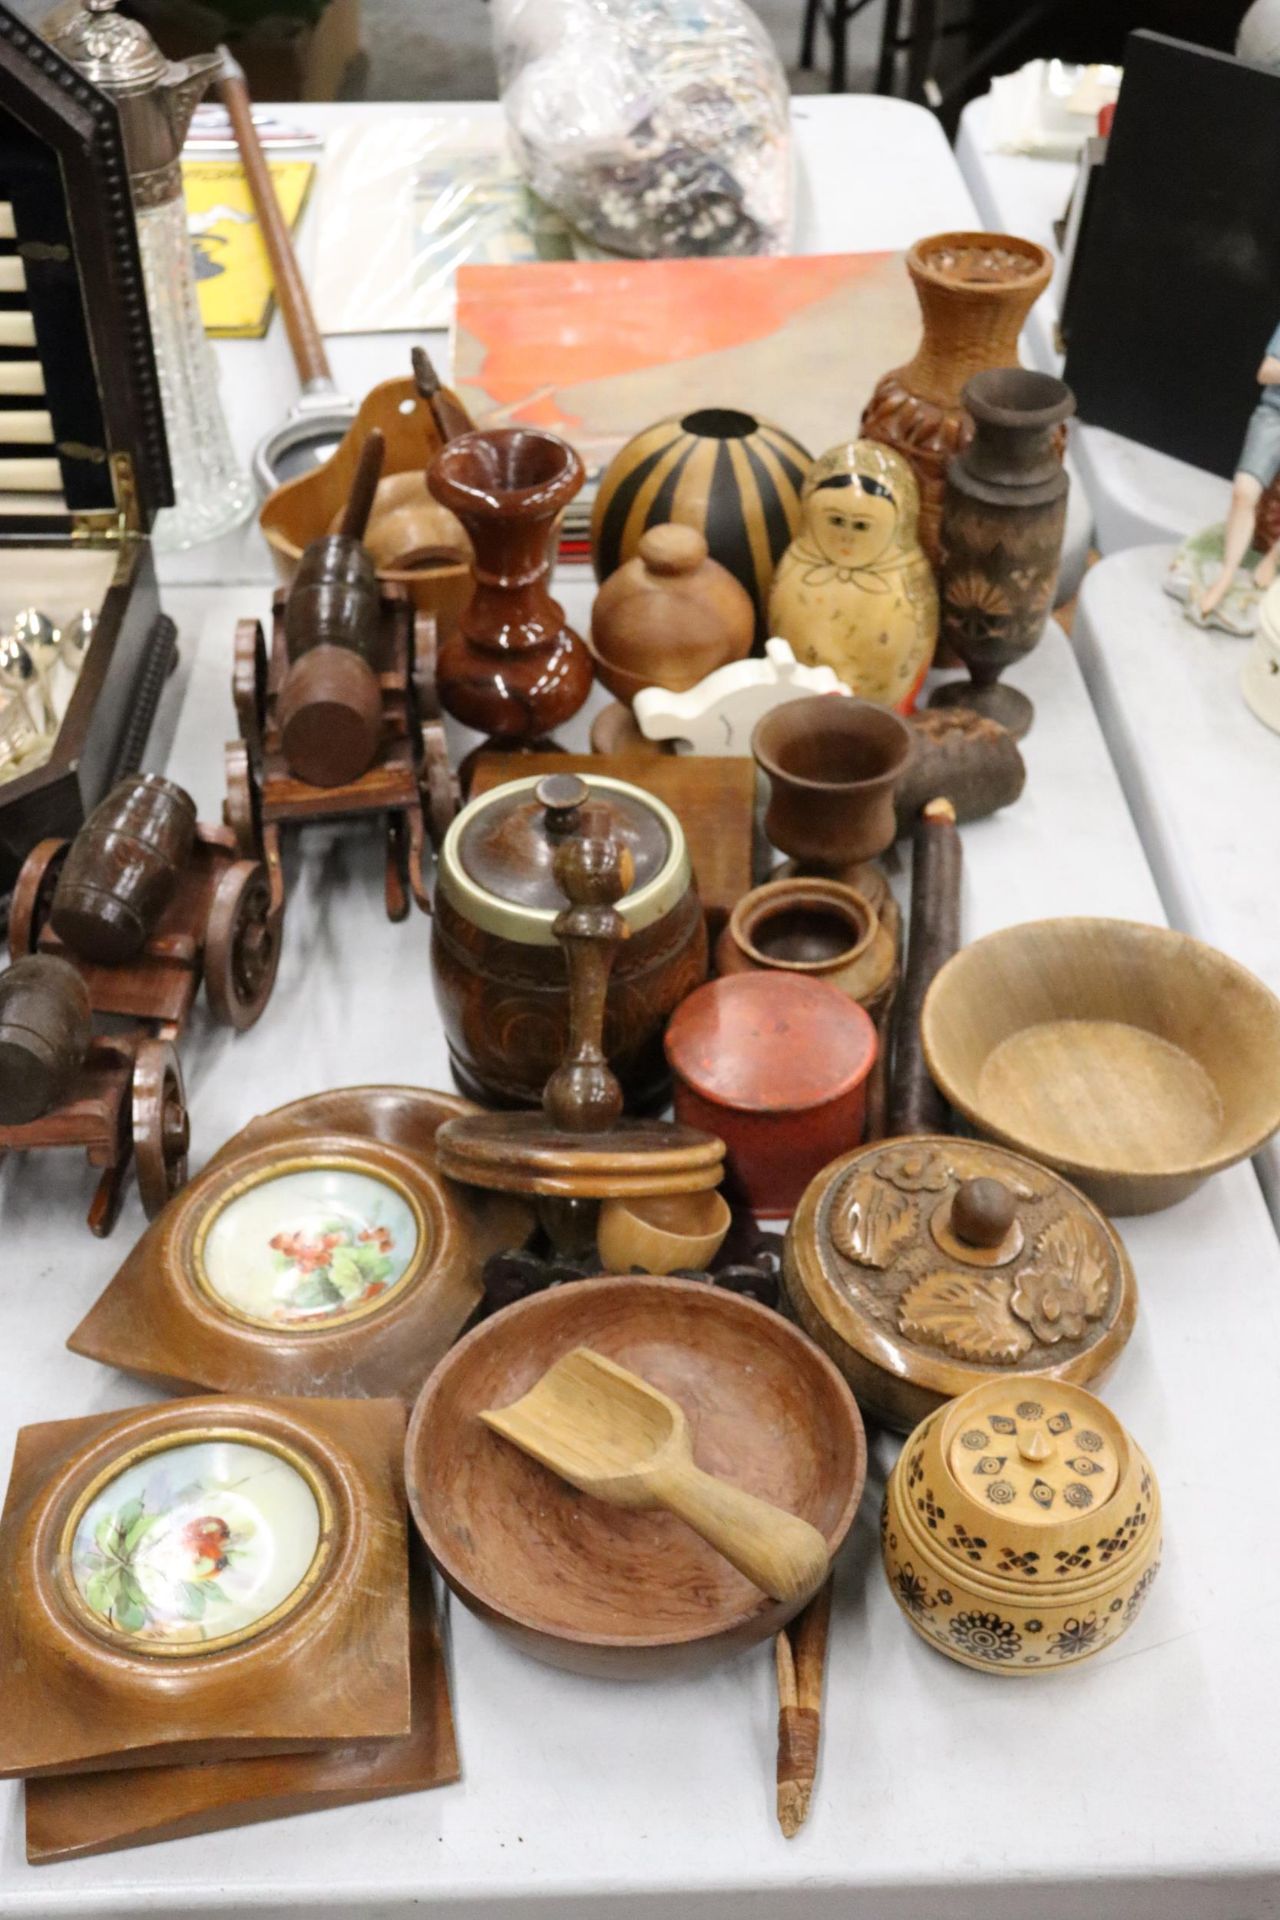 A LARGE QUANTITY OF TREEN ITEMS TO INCLUUDE BOWLS, TRINKET BOXES, FRAMED HANDPAINTED TILES,